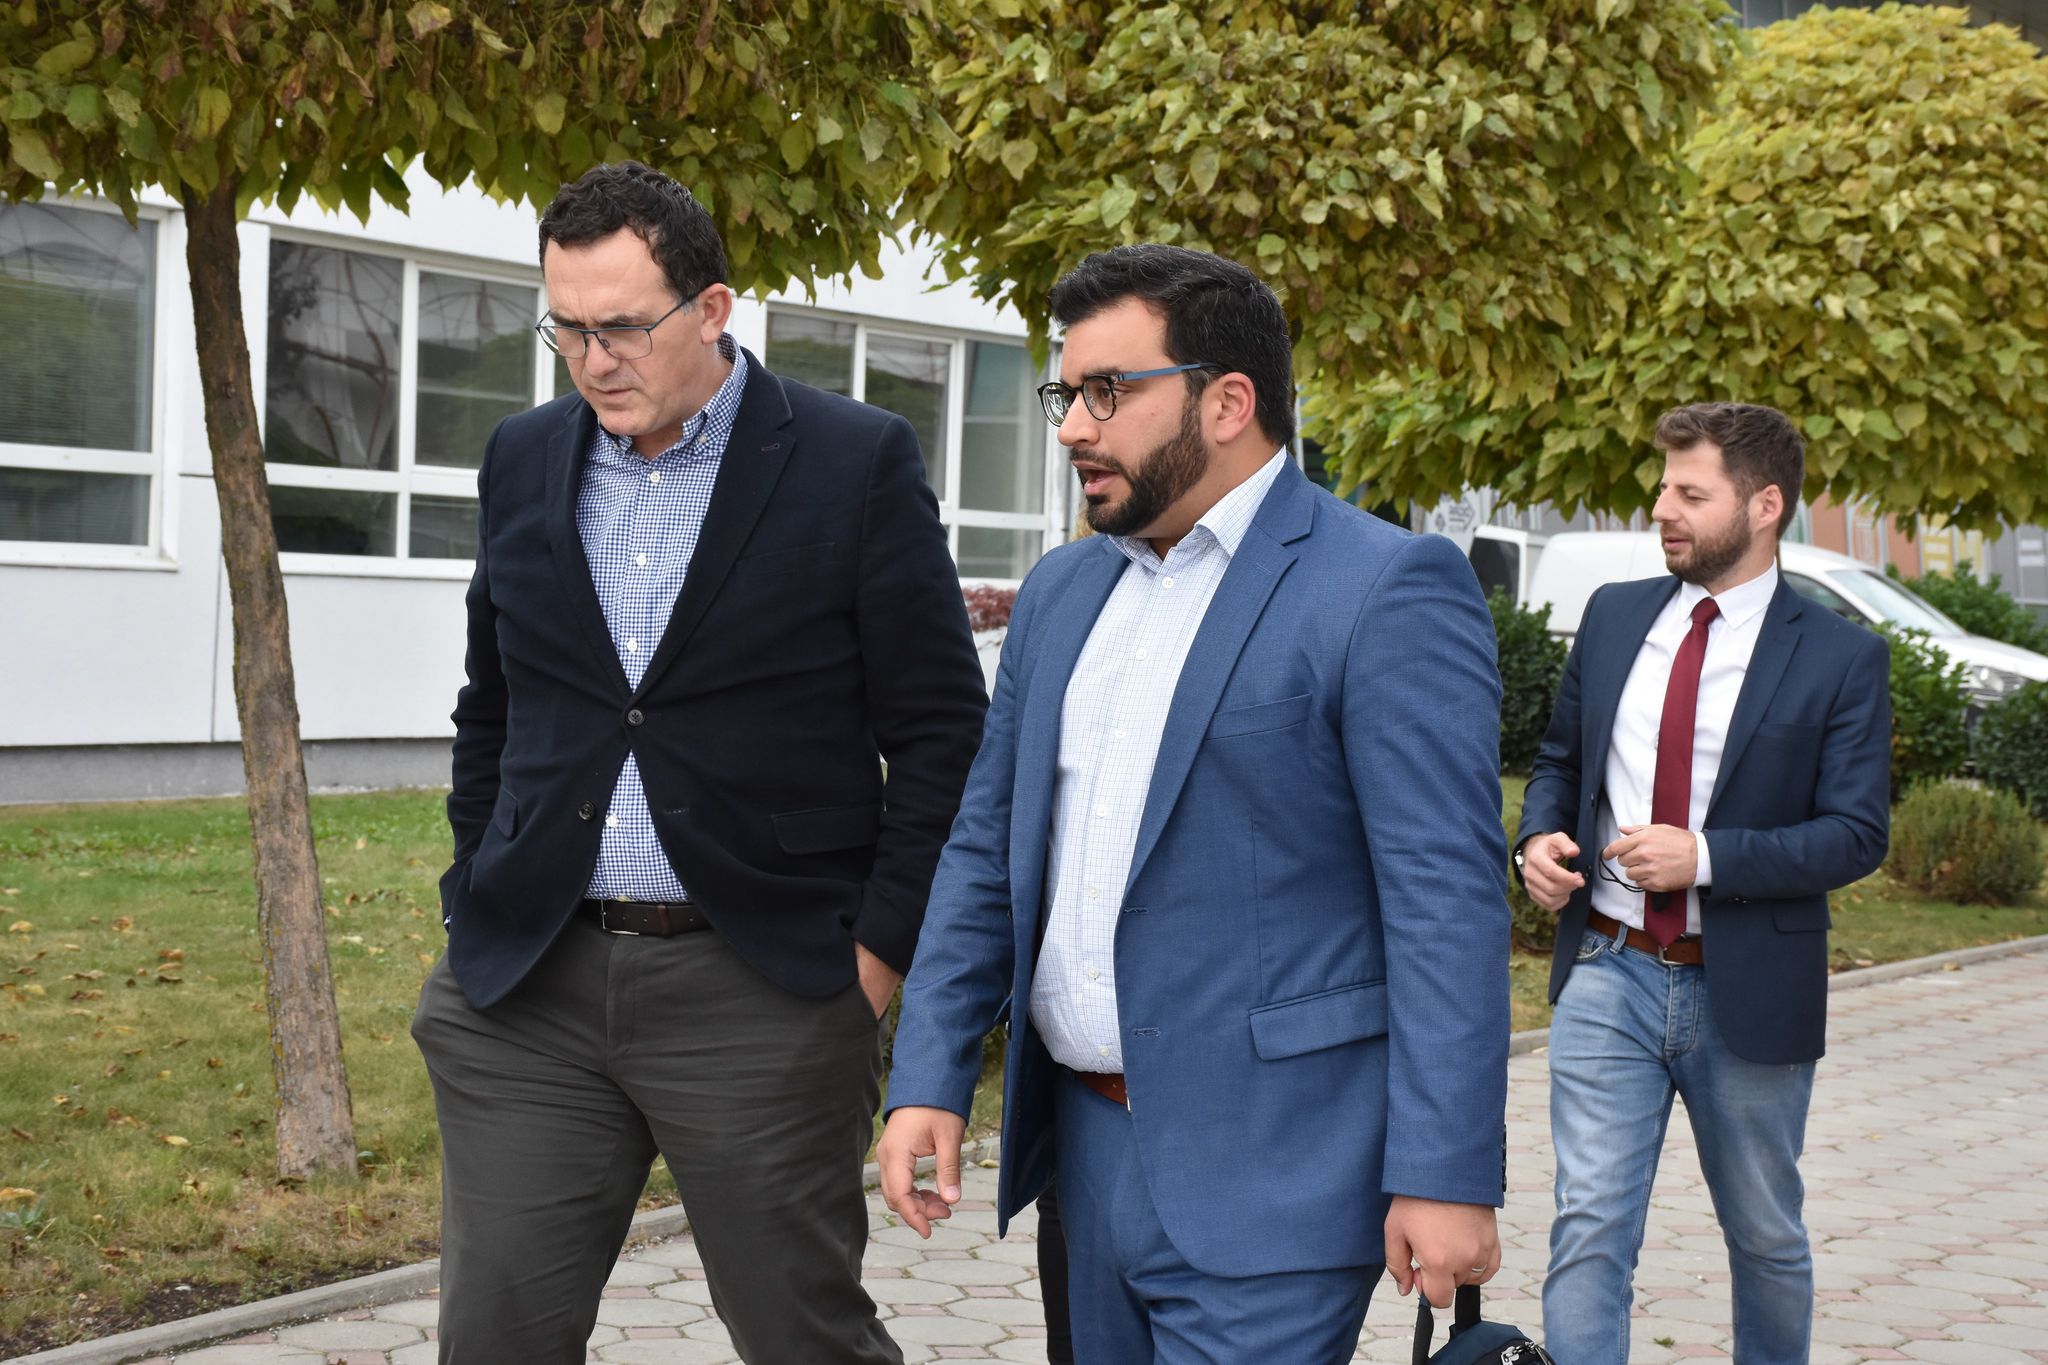 The Head of UN Habitat in Kosovo, has visited the Innovative and Science Park of UBT